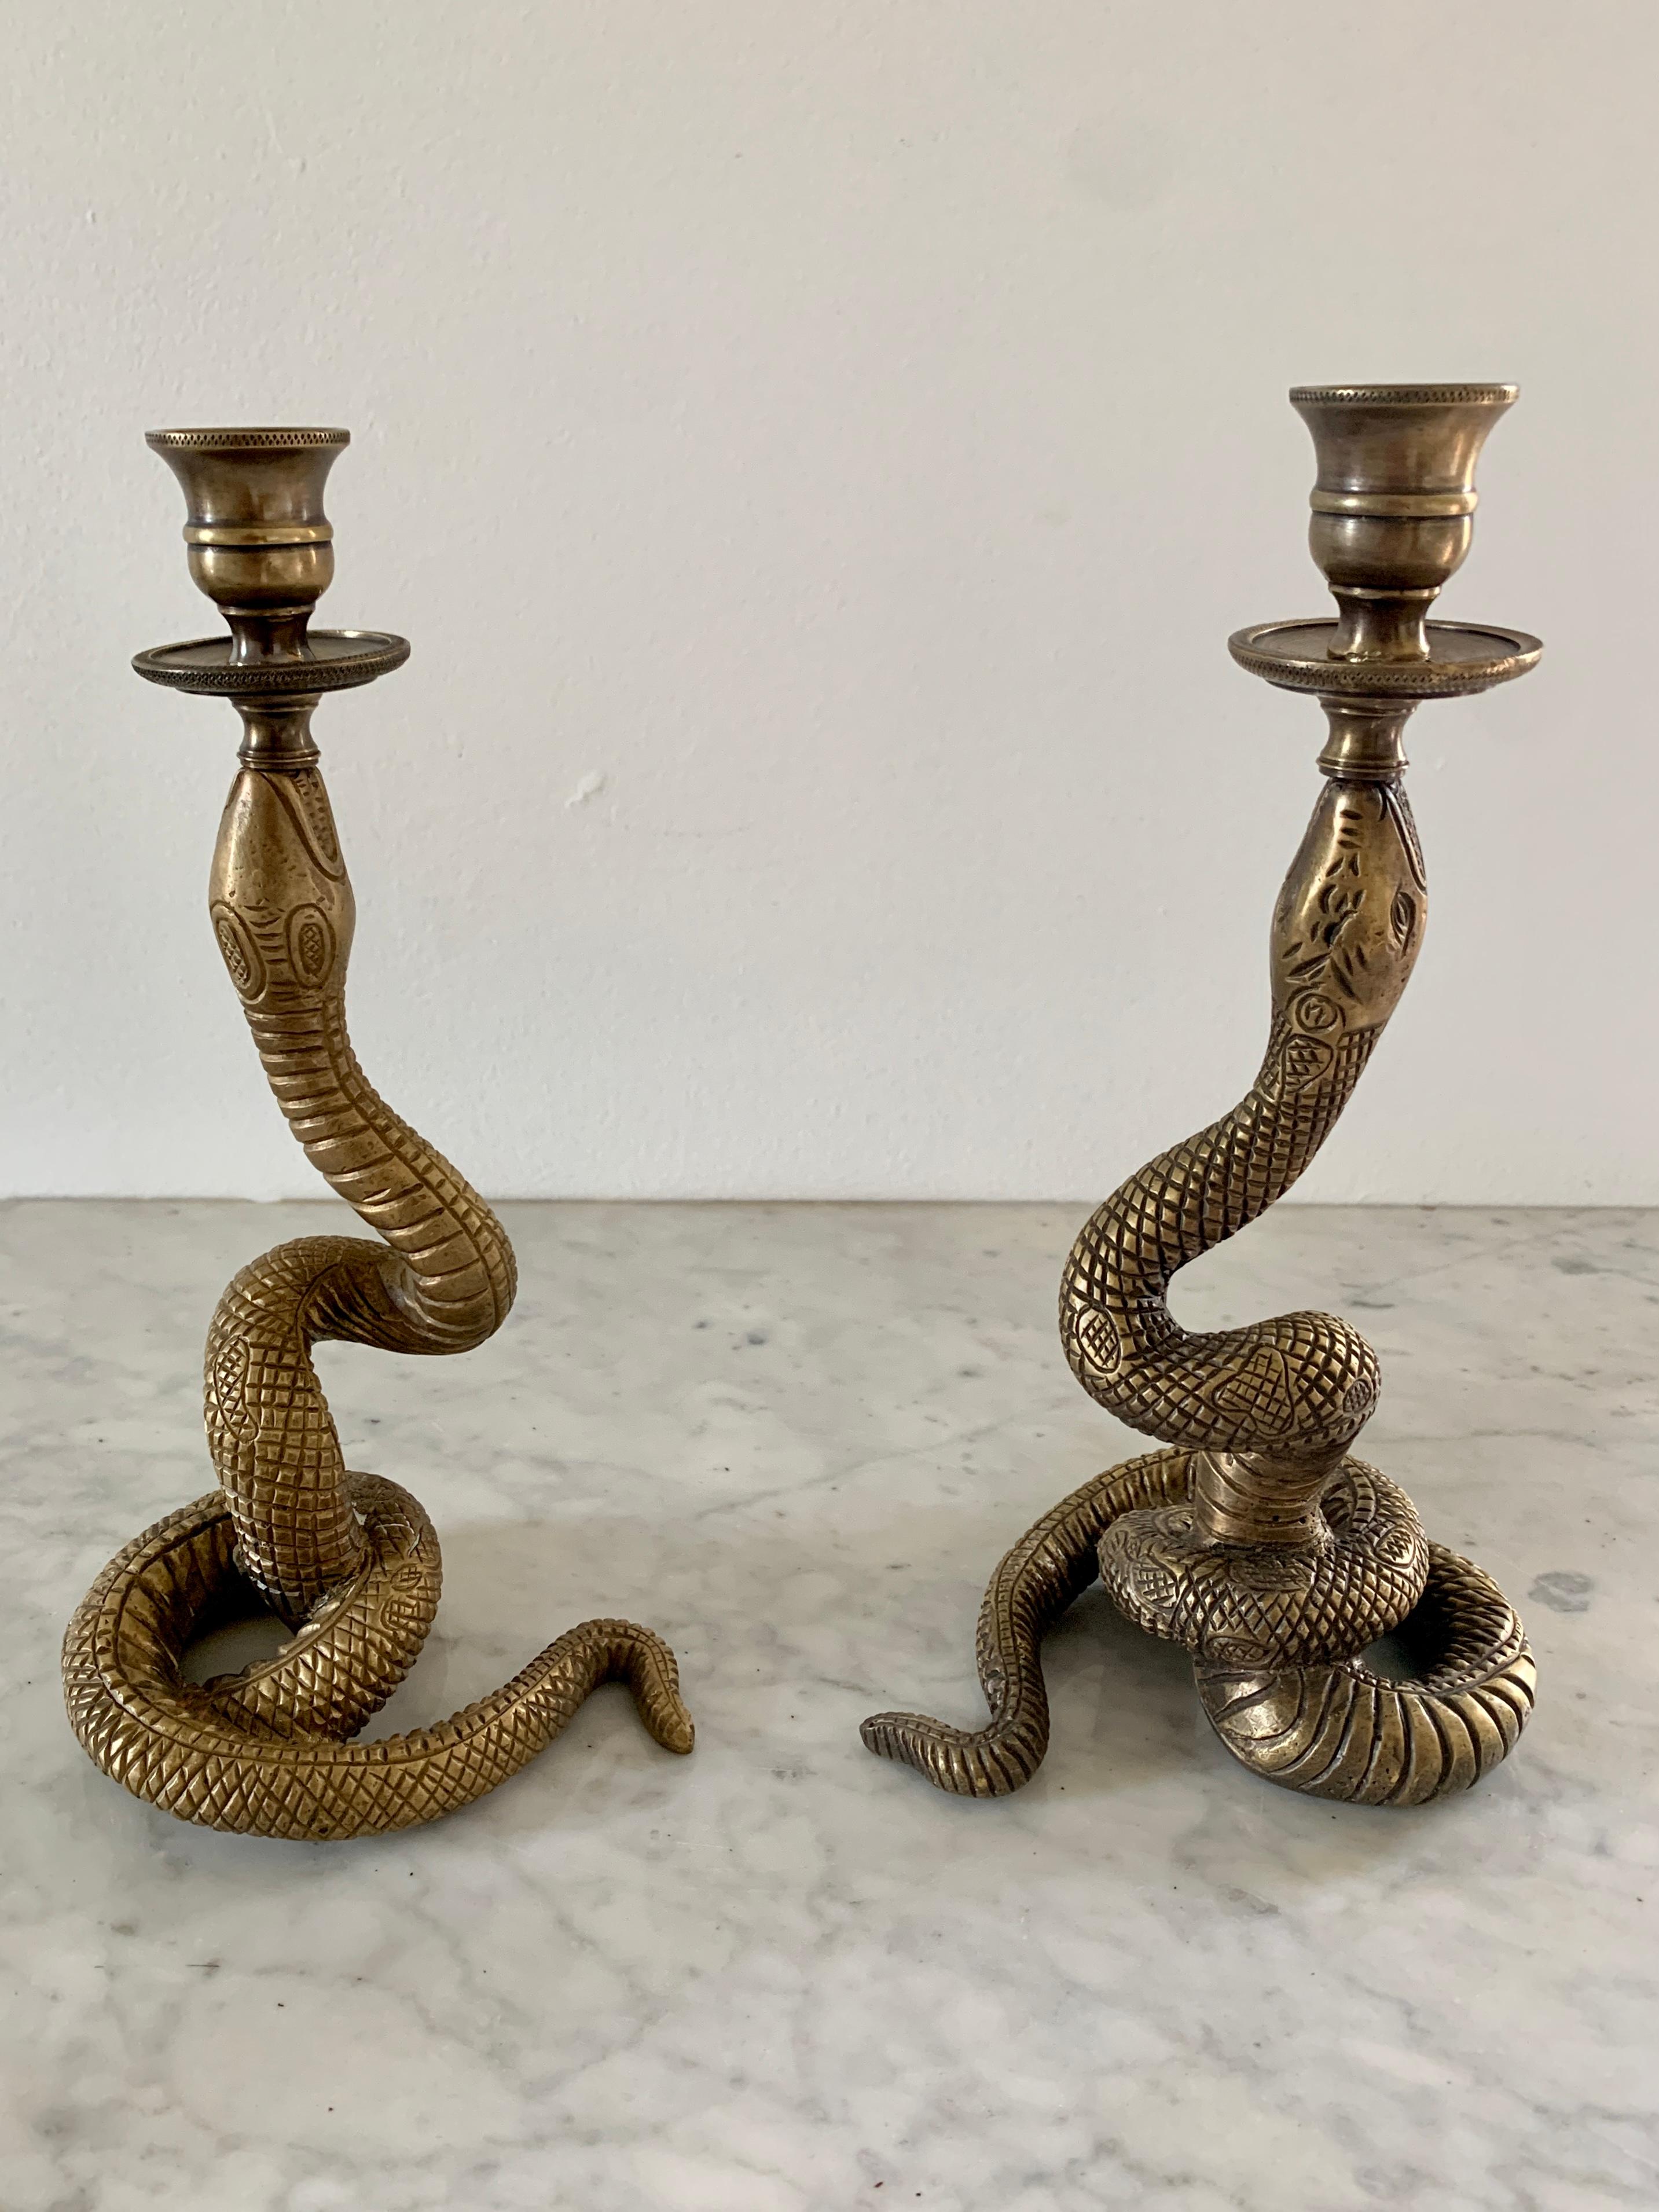 20th Century Vintage Brass Serpent Snake Candle Holders, Pair